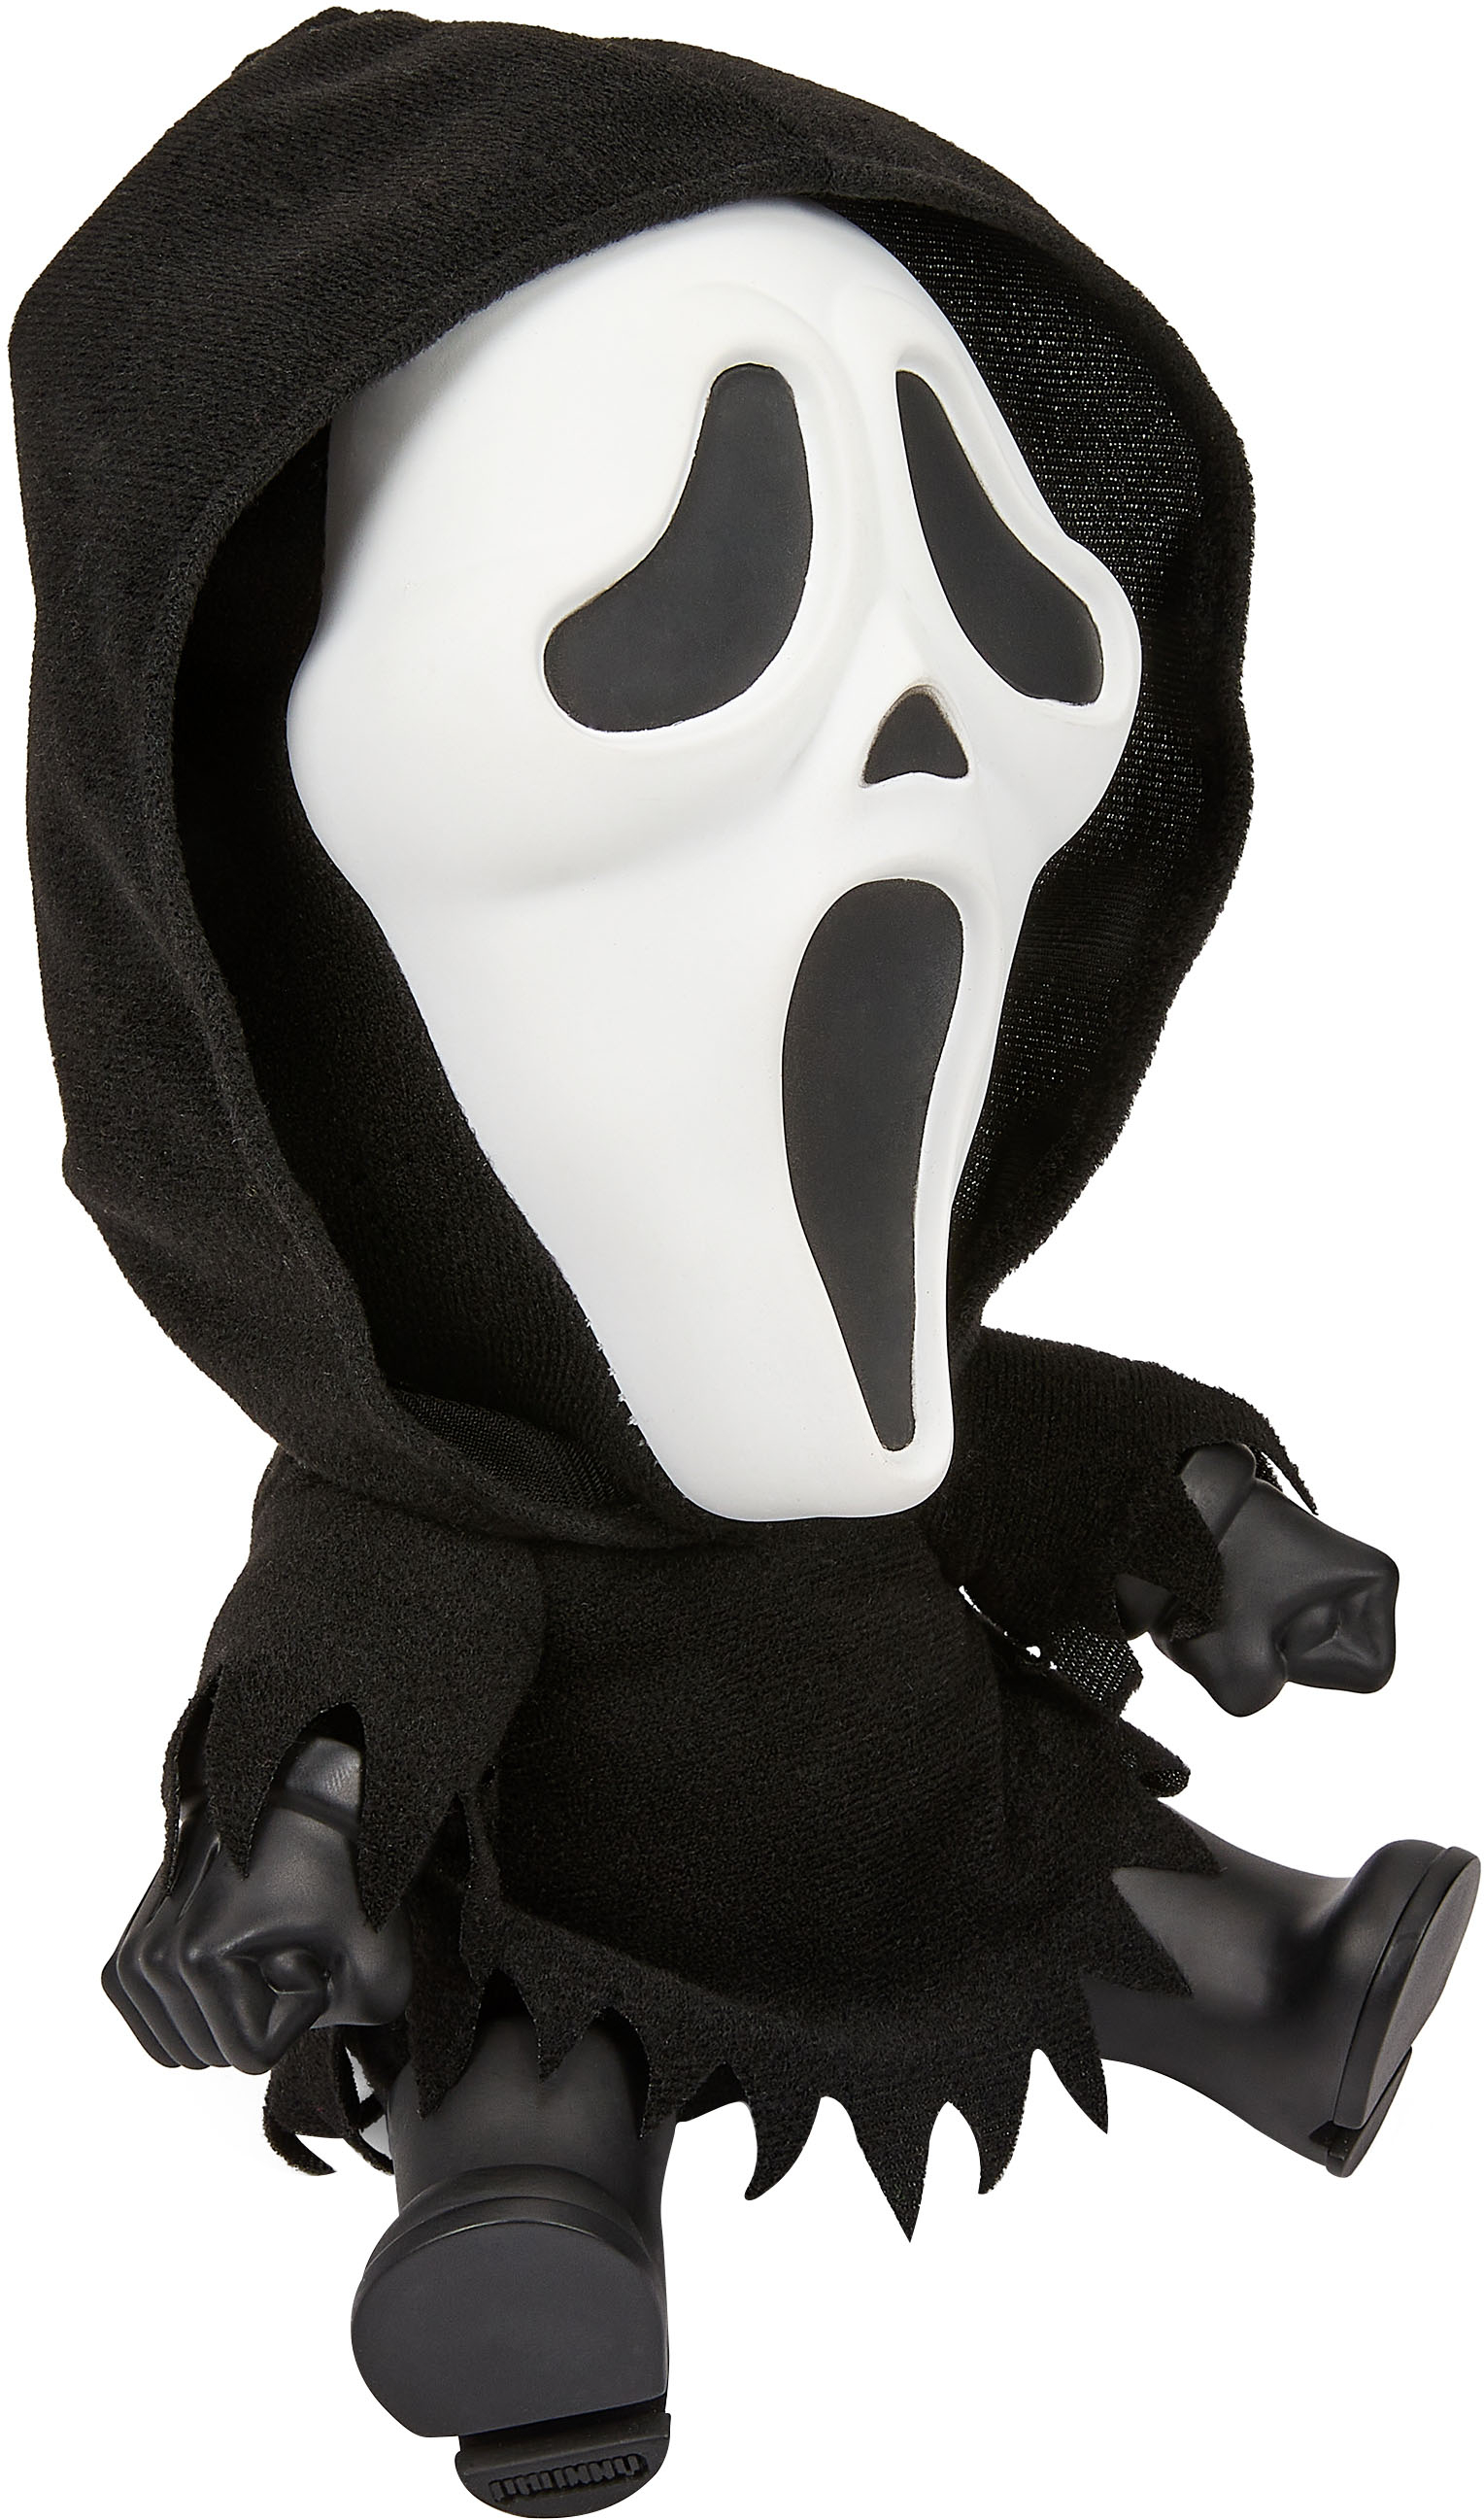 NECA KIDROBOT Roto Phunny PLUSH GHOST FACE 8 Target New with Tags